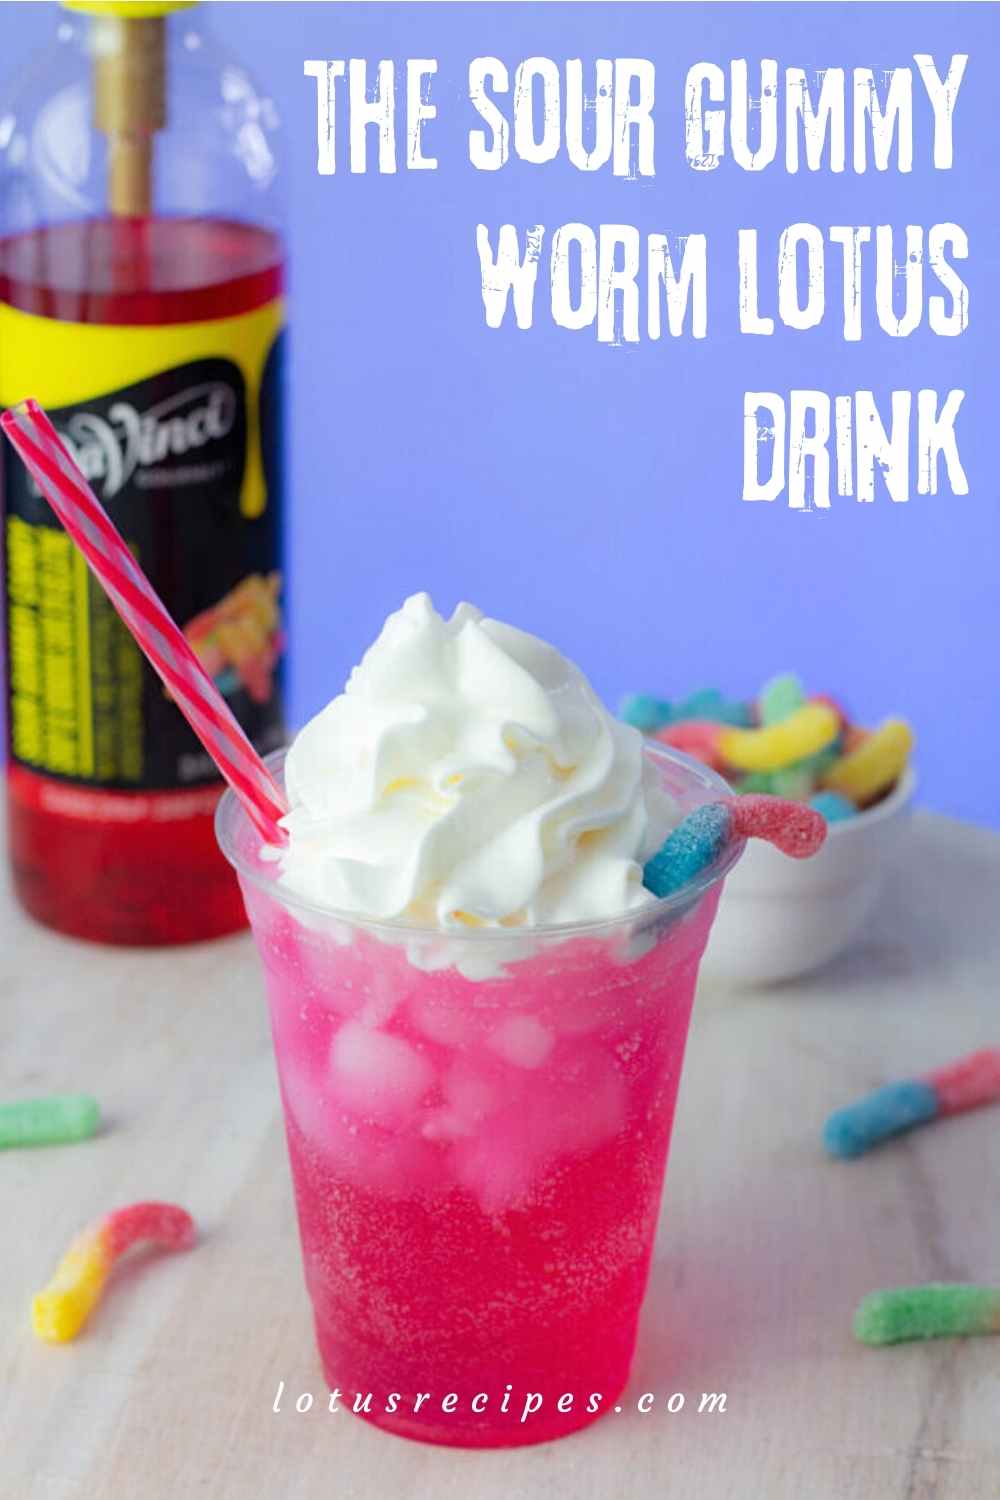 the sour gummy worm lotus drink-pin image